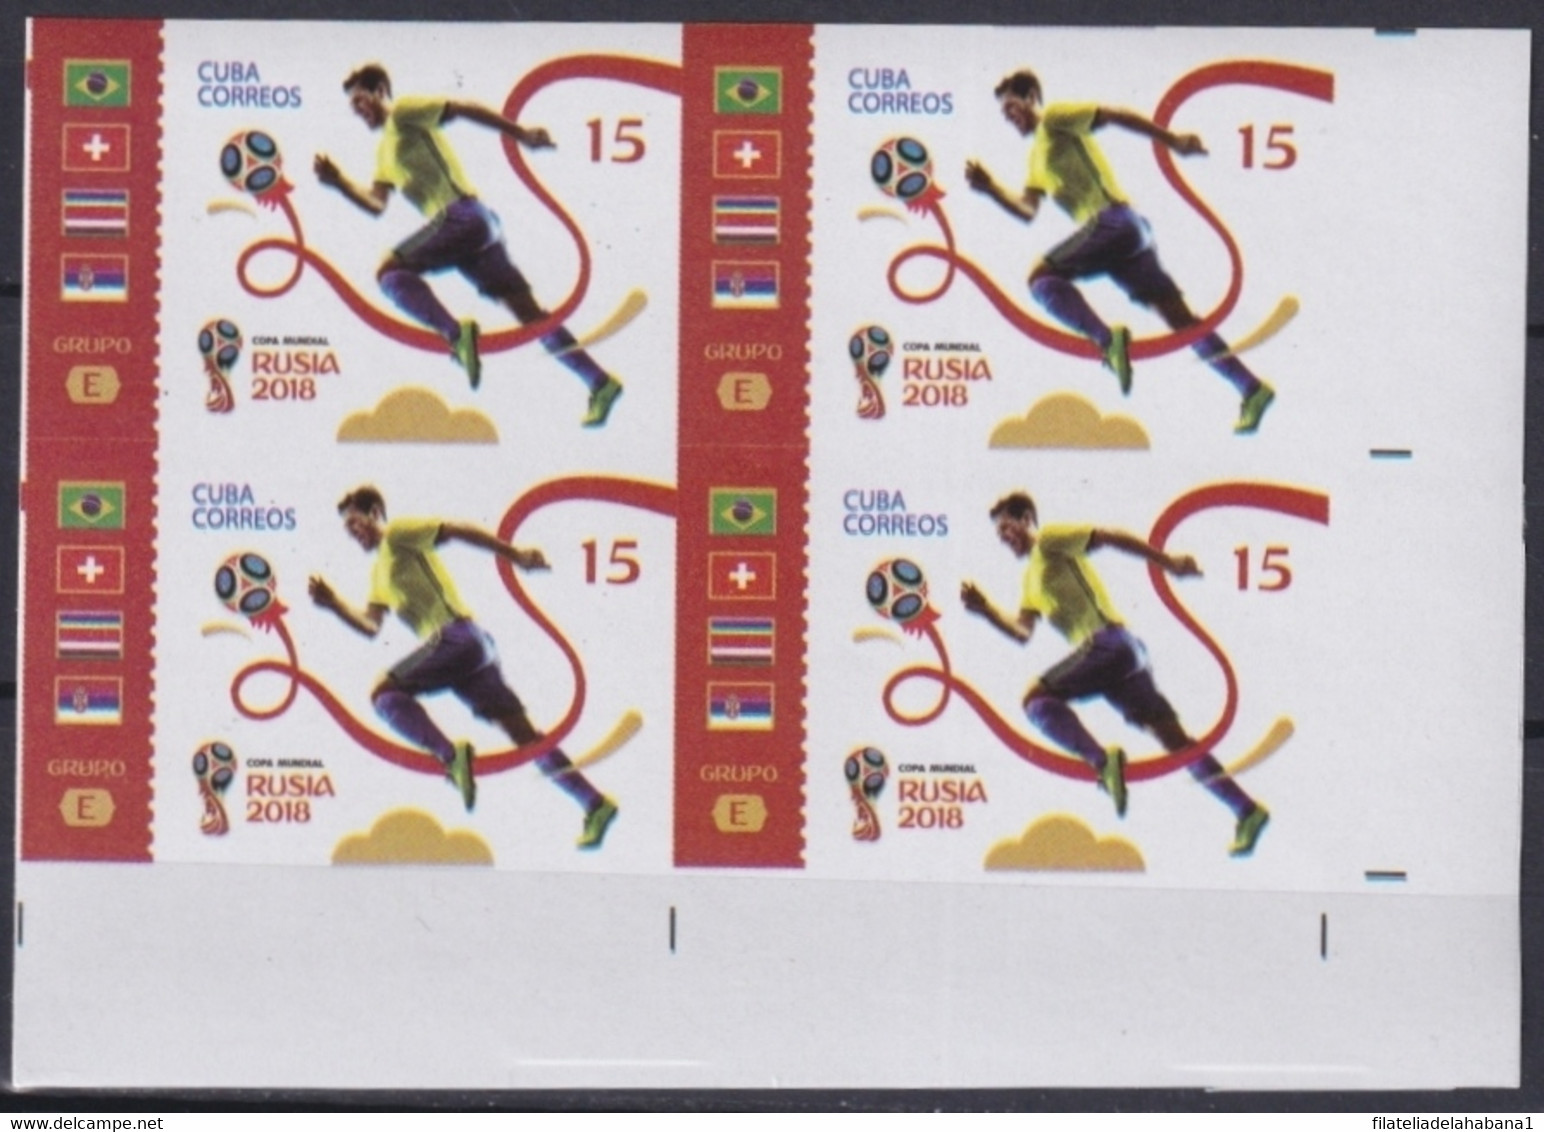 2018.214 CUBA MNH 2018 IMPERFORATED PROOF 15c RUSSIA WORLD SOCCER CHAMPIONSHIP. - Imperforates, Proofs & Errors